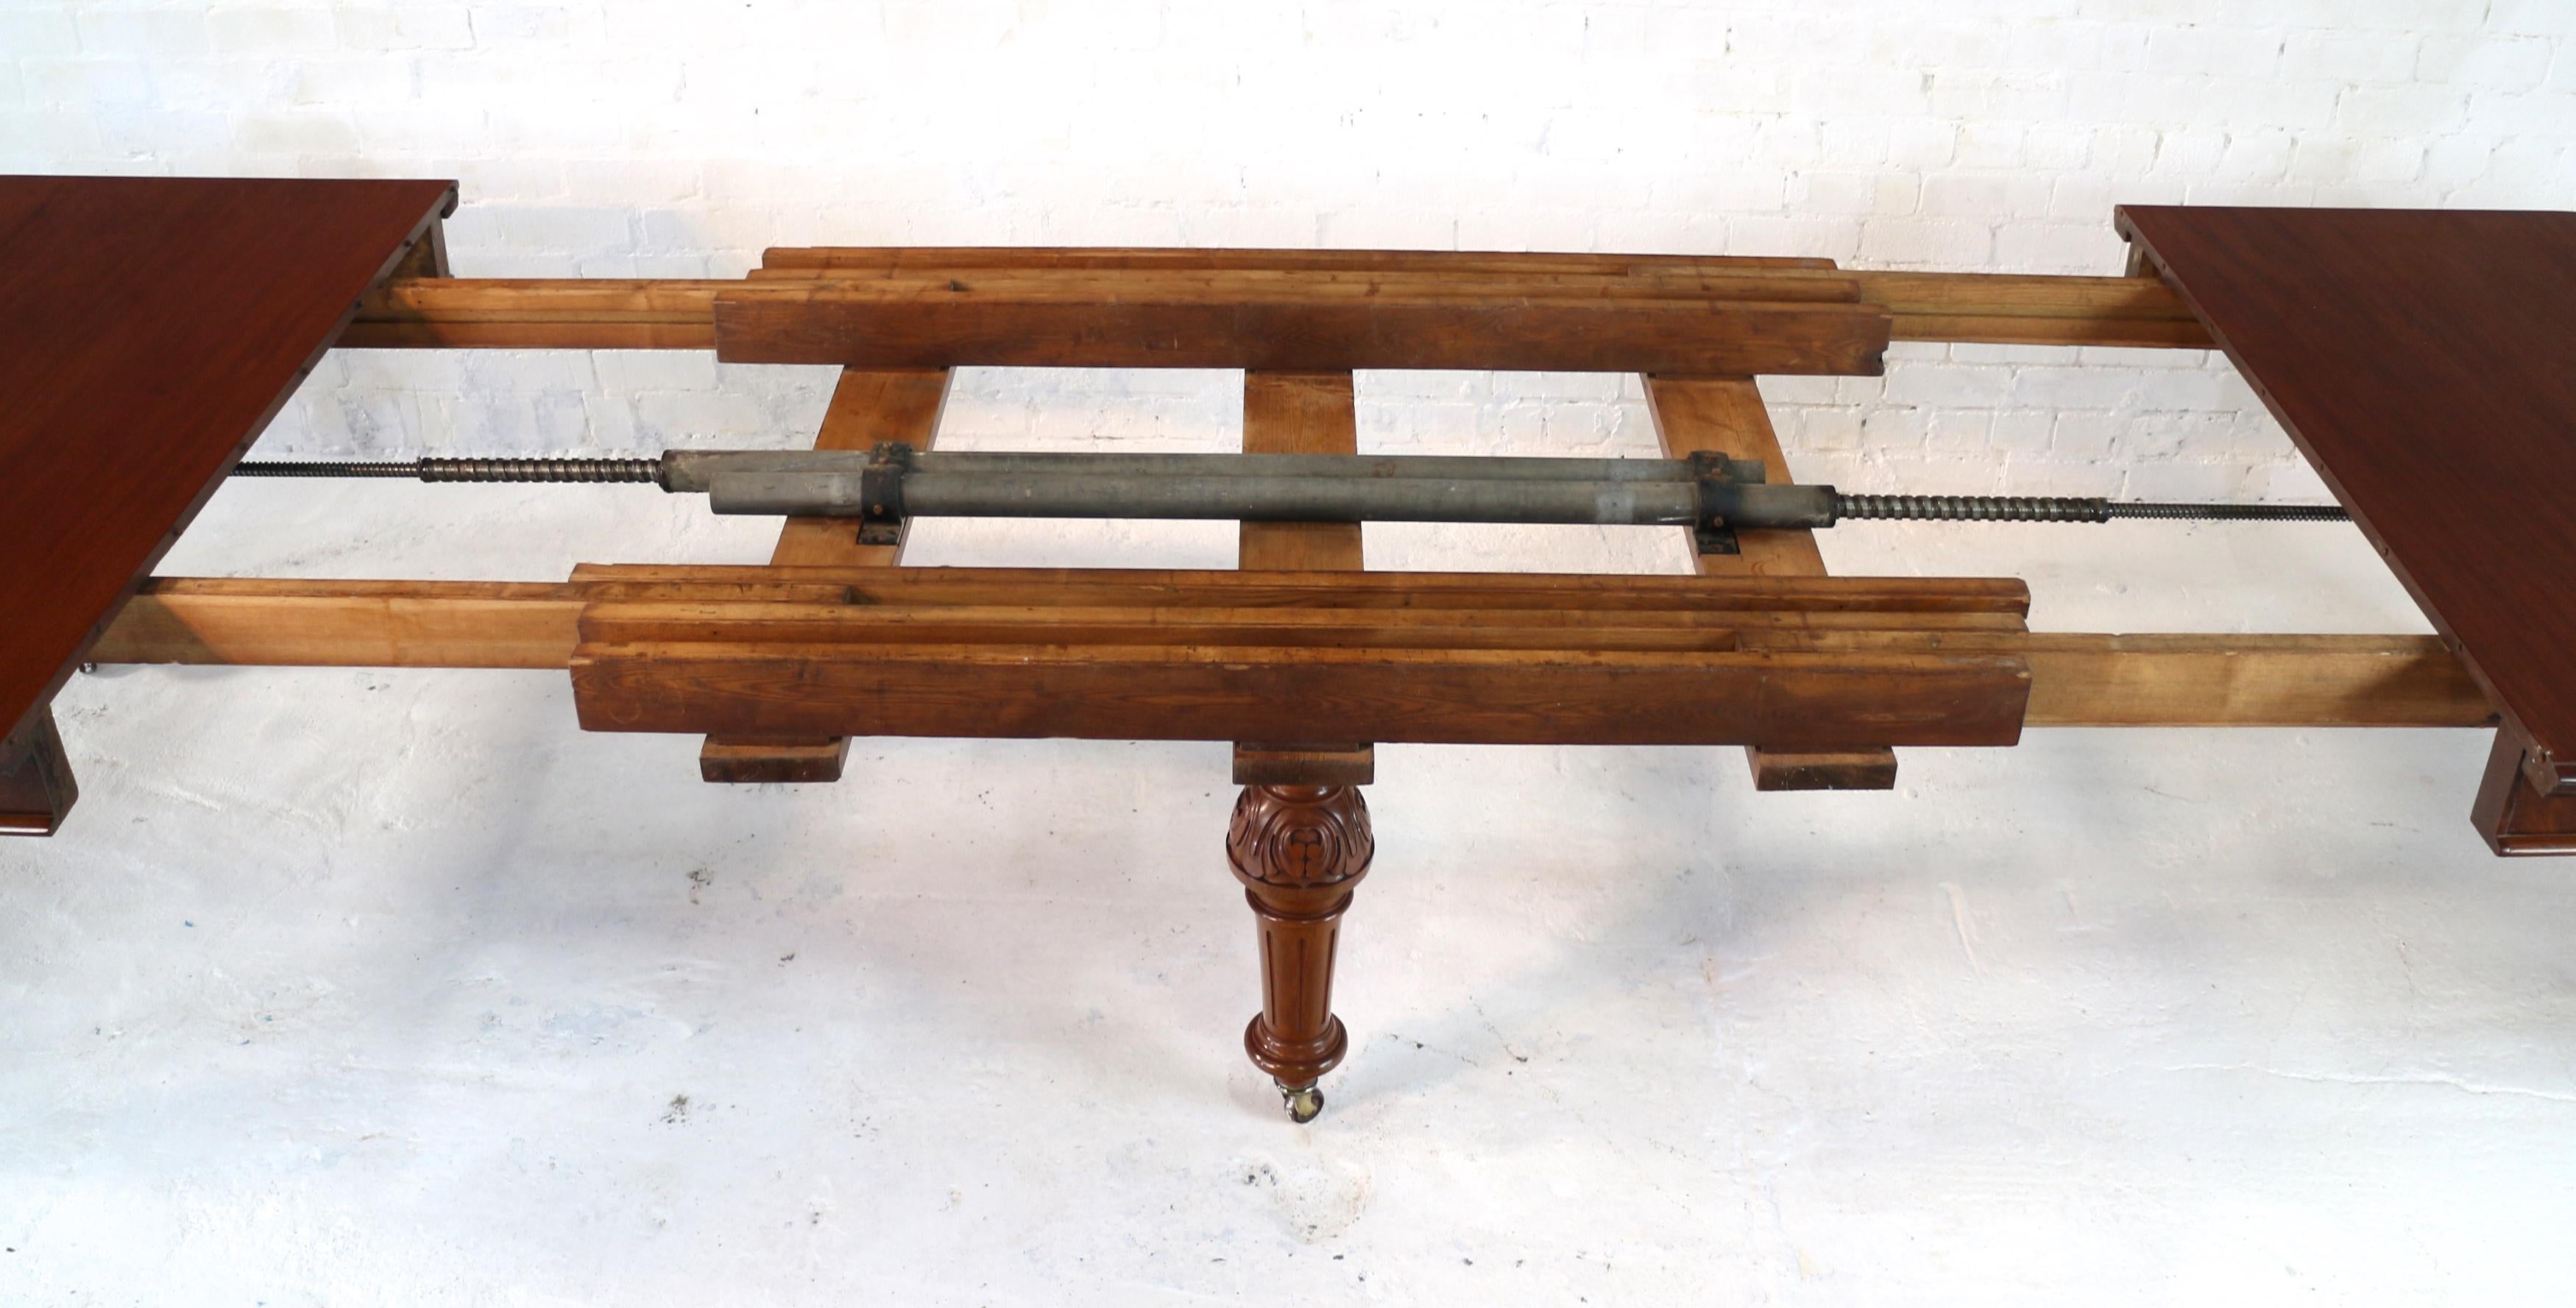 Antique English Victorian Mahogany Extending Dining Table and 4 Leaves, Seats 16 For Sale 2